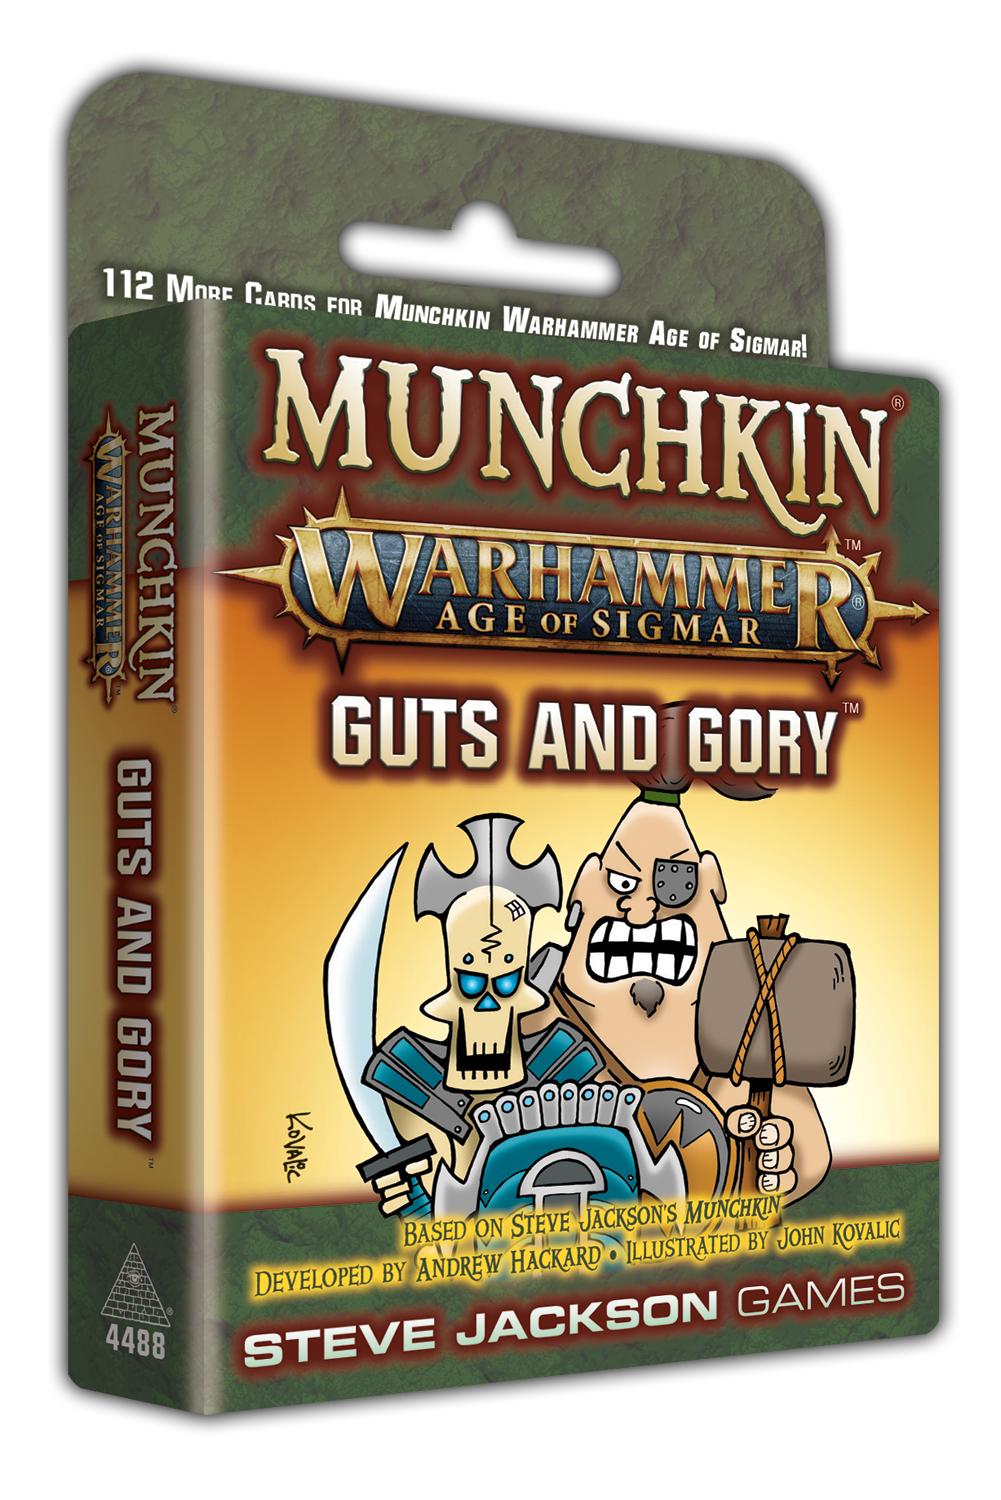 Munchkin: Warhammer Age of Sigmar - Guts and Gory Expansion - Bards & Cards